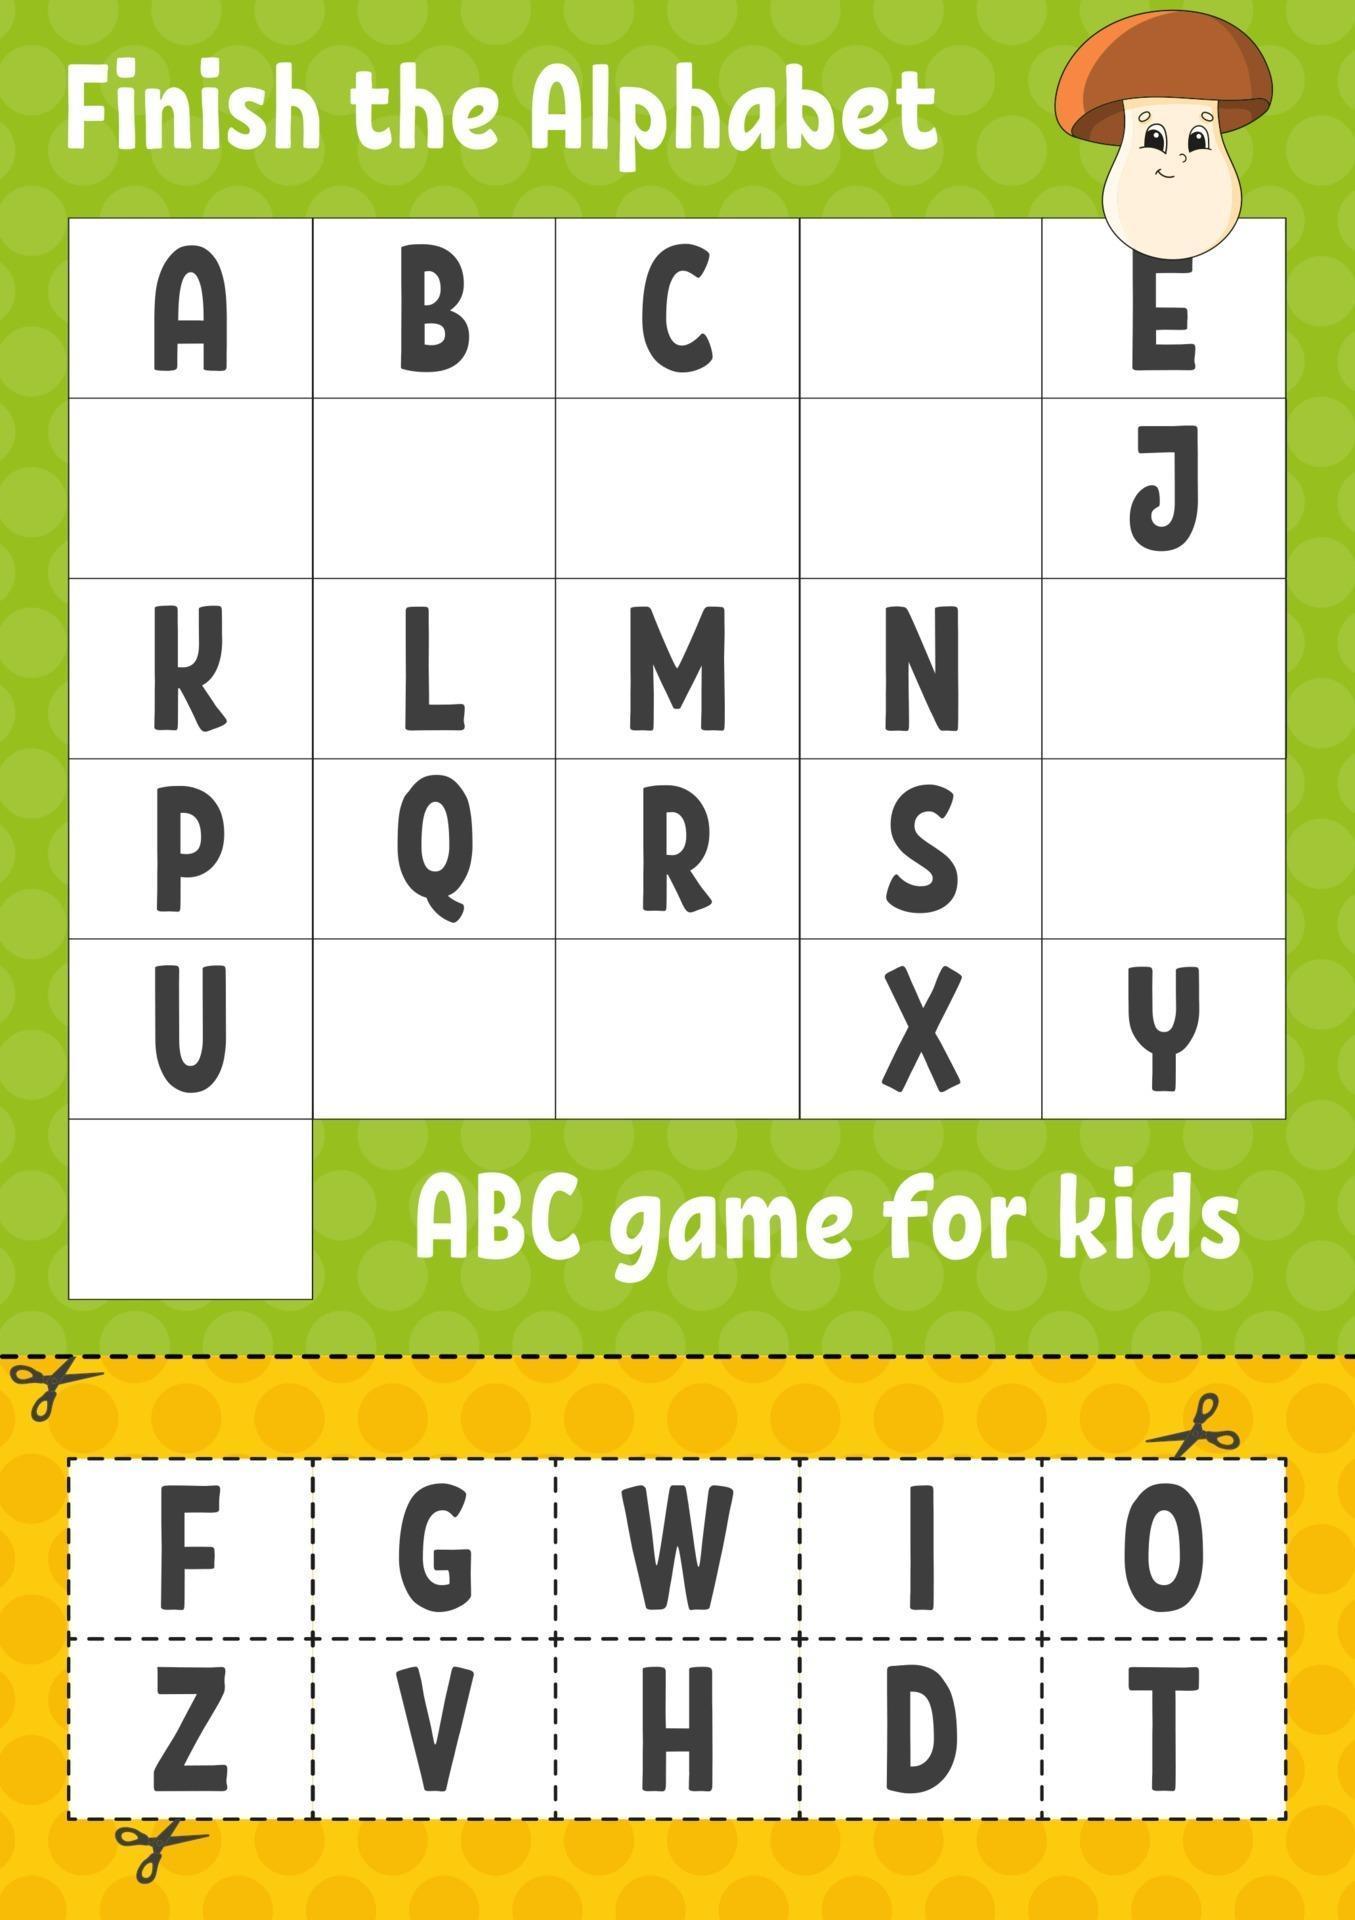 finish-the-alphabet-abc-game-for-kids-cut-and-glue-education